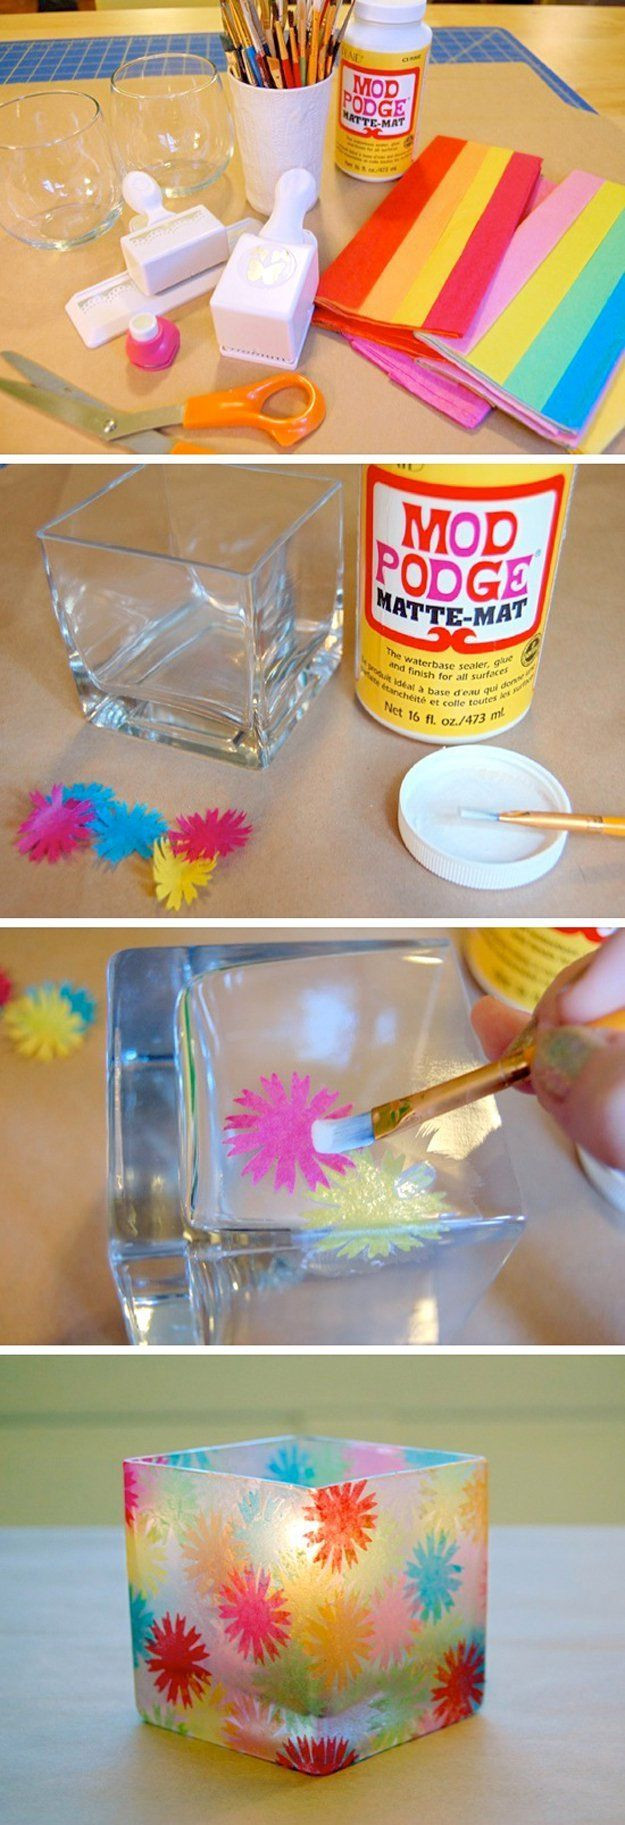 Easy Fun Crafts For Adults
 25 best ideas about Easy Diy Crafts on Pinterest